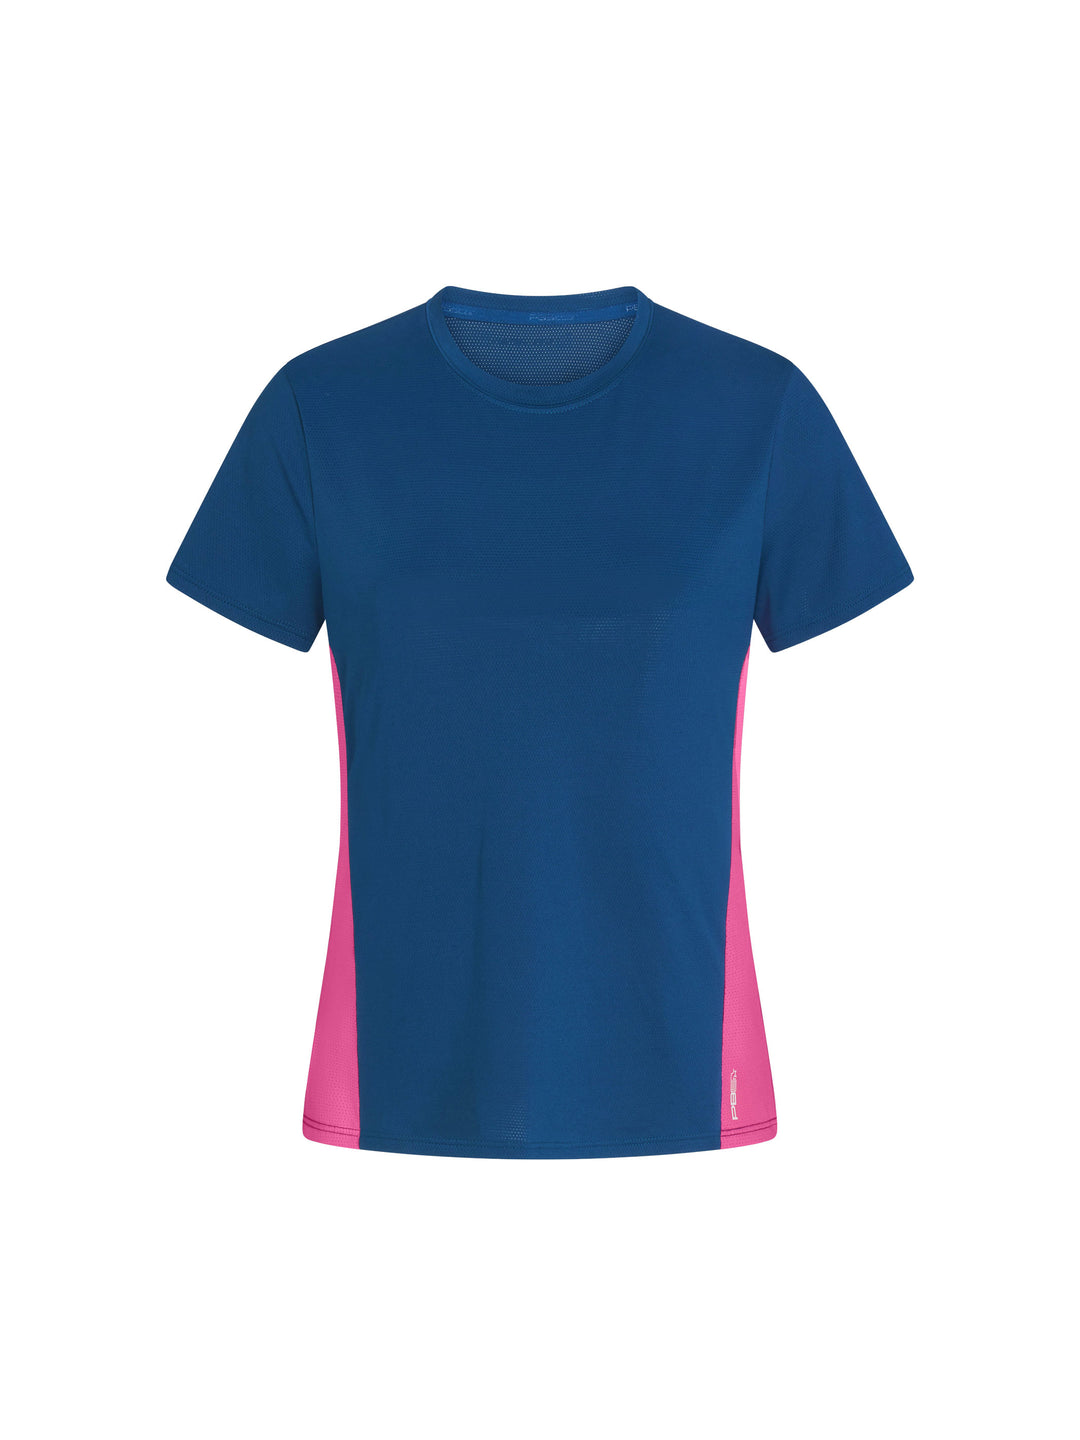 Women's Vented Court Tee front view in astral blue and pink. Small logo on lower left side.